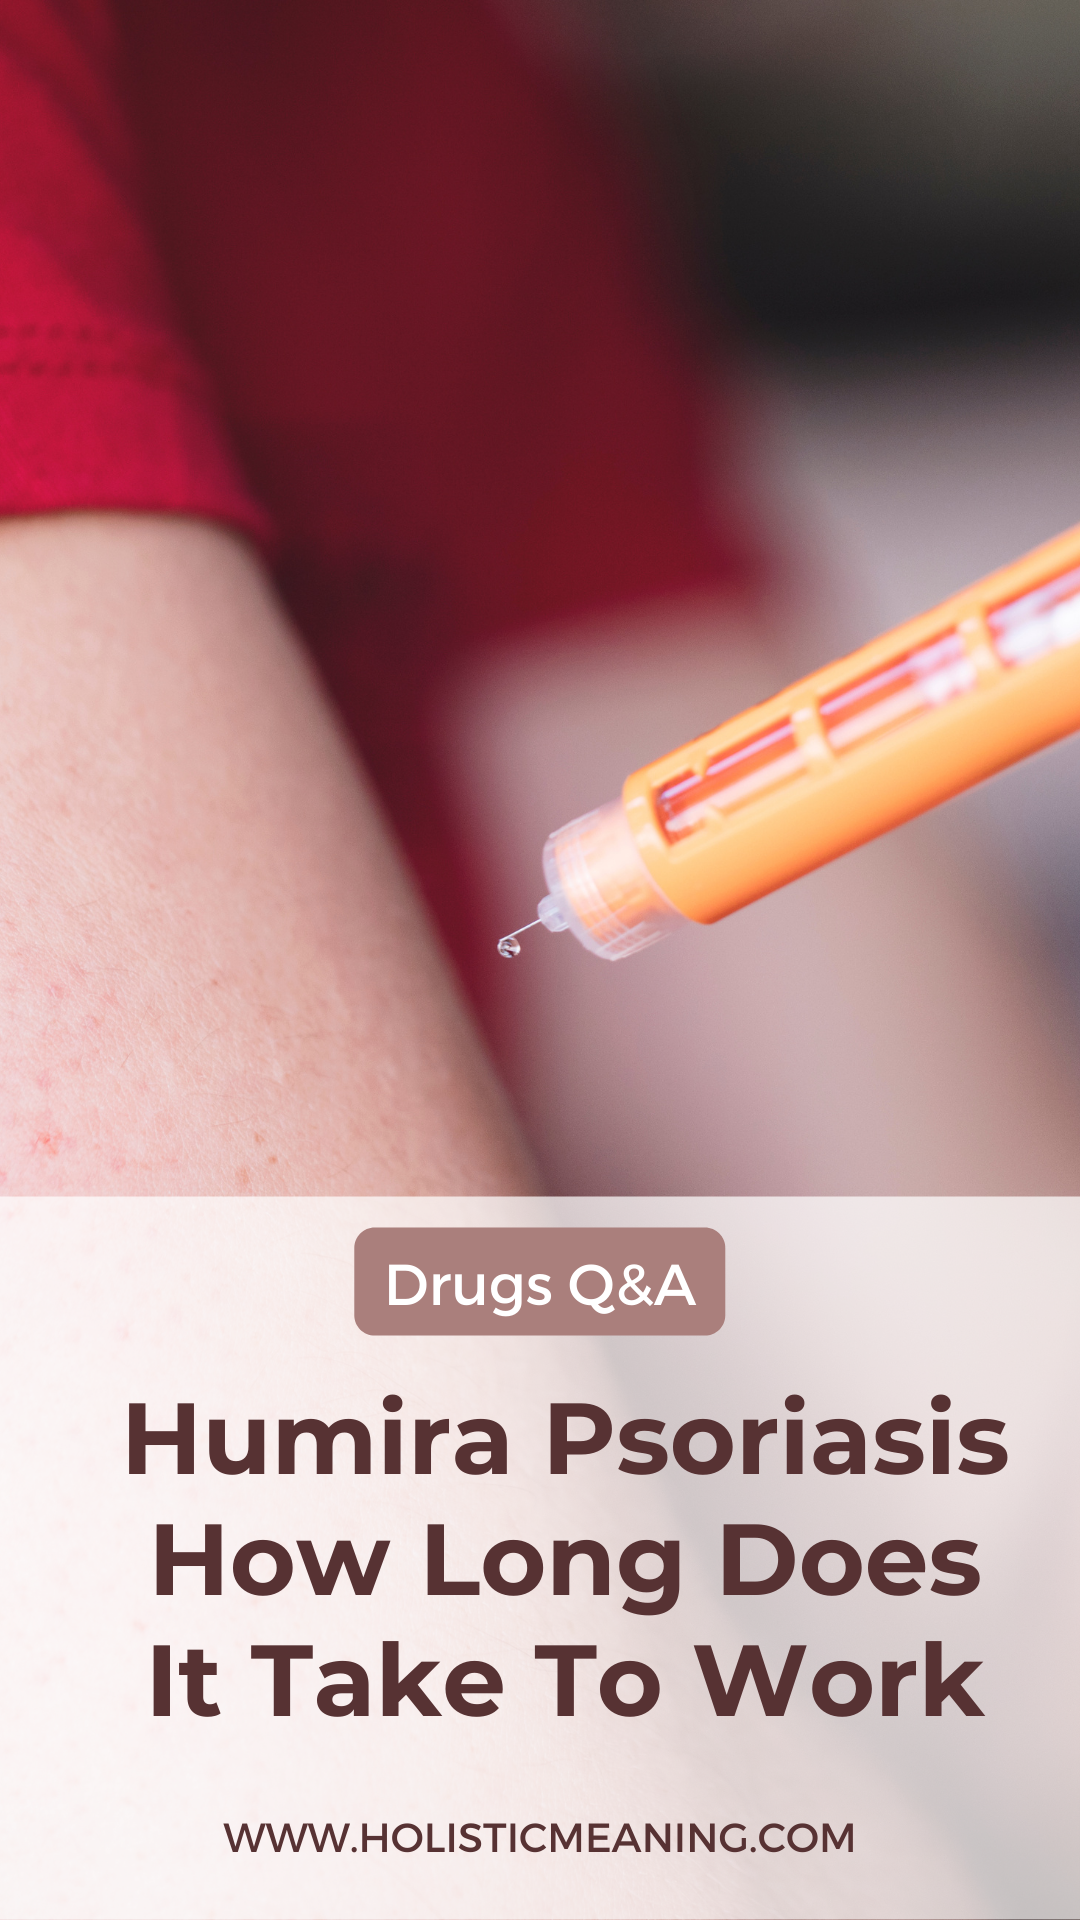 Humira Psoriasis How Long Does It Take To WorkHumira Psoriasis How Long Does It Take To Work